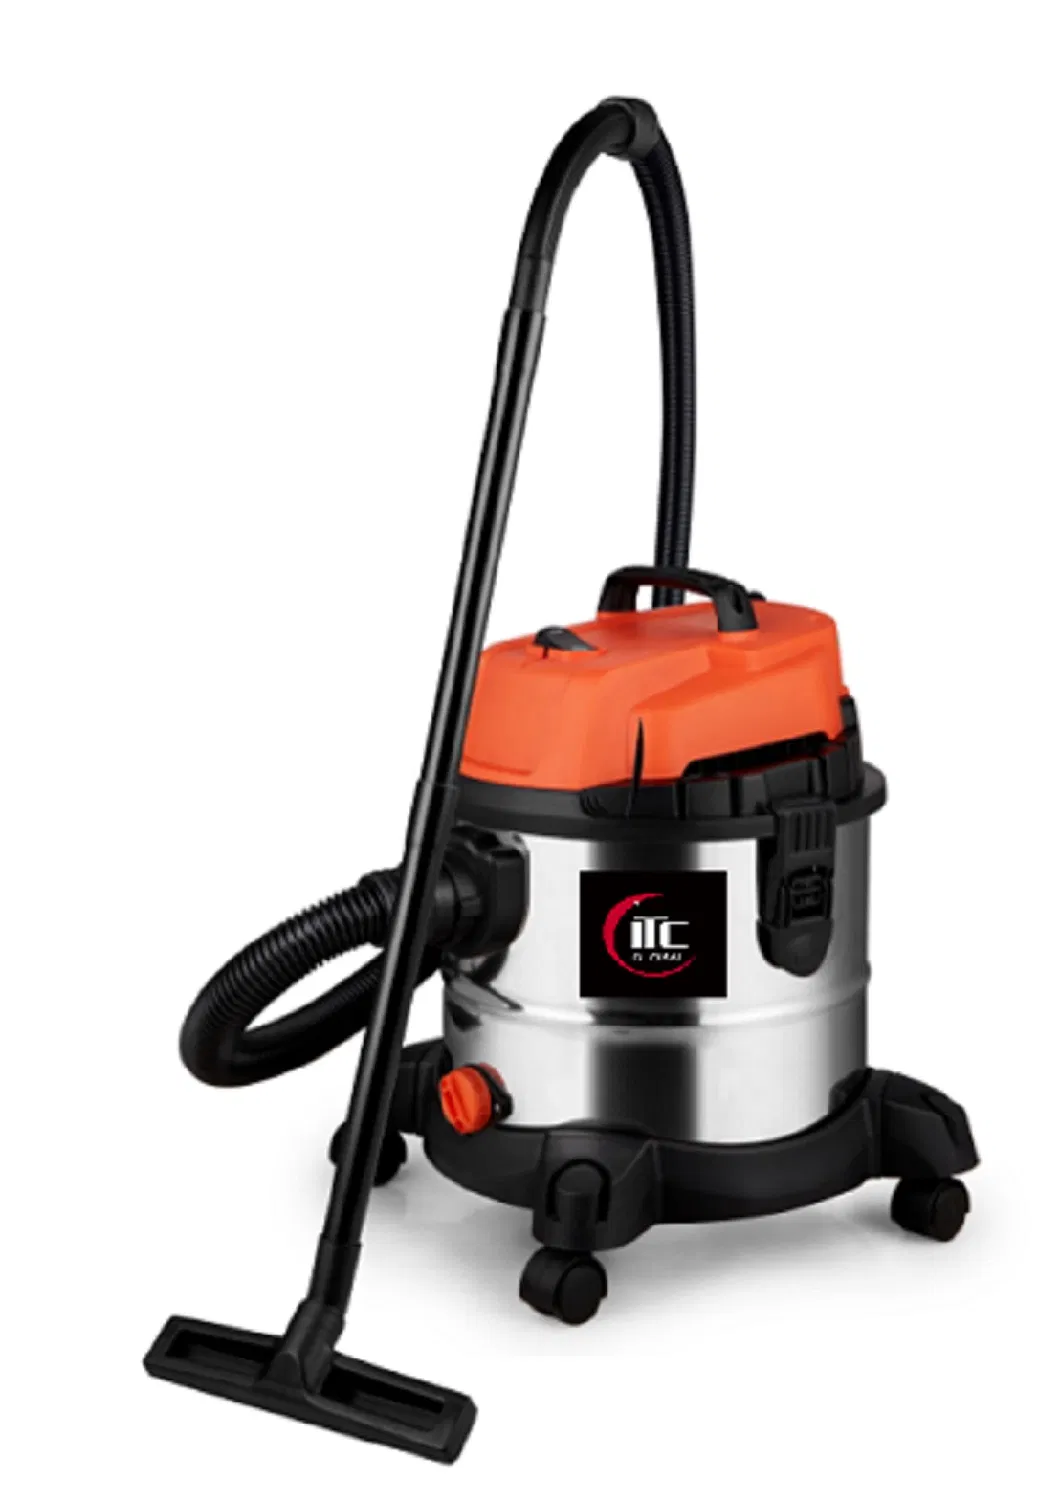 2022 Household-Super Convenient-Powerful-Electric Power-Tool Machines-Vacuum Cleaner